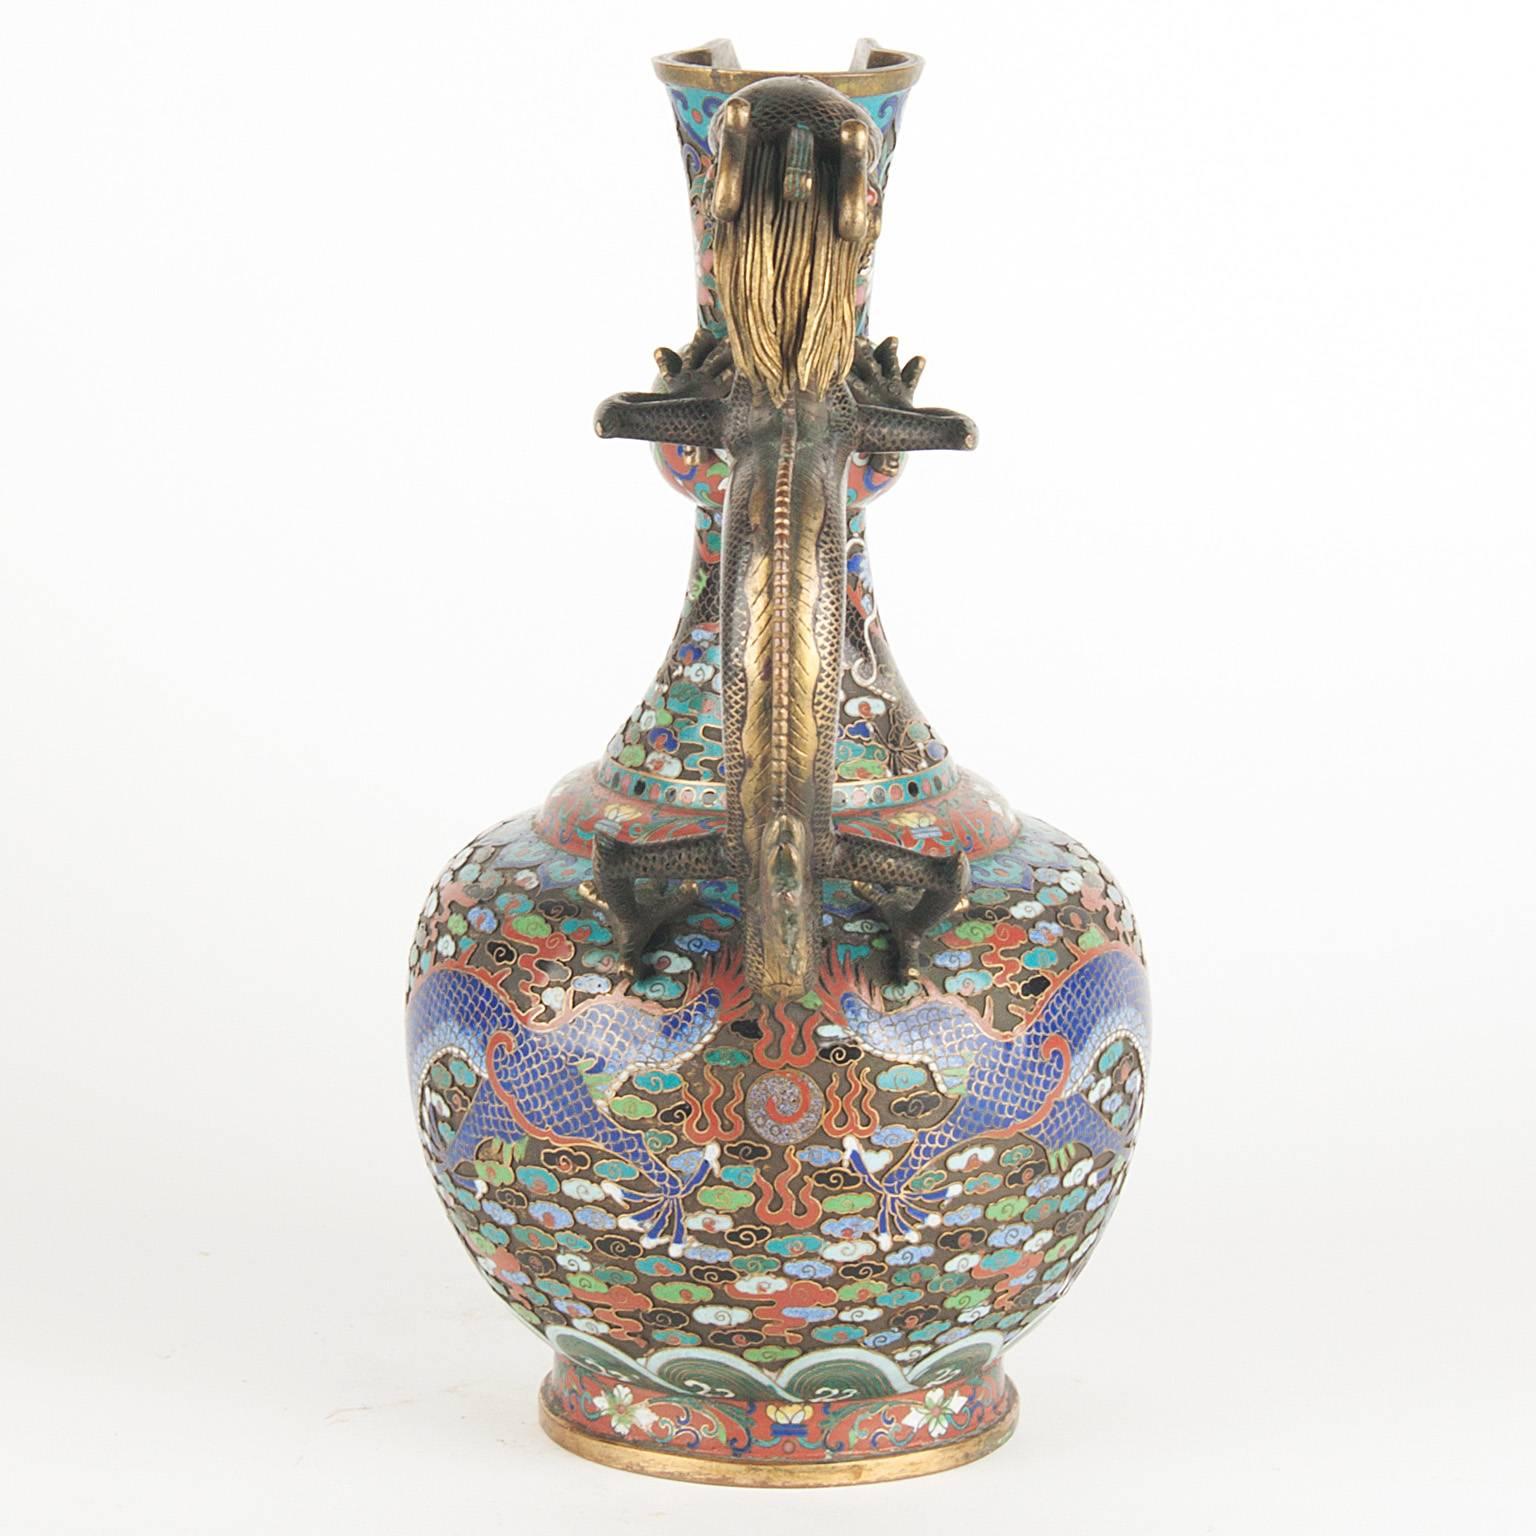 Chinese cloisonne ewer with floral decoration and gilt bronze dragon handle. The handle is decorated with Precious Stones,
late 19th century.
The ewer is signed at the bottom.